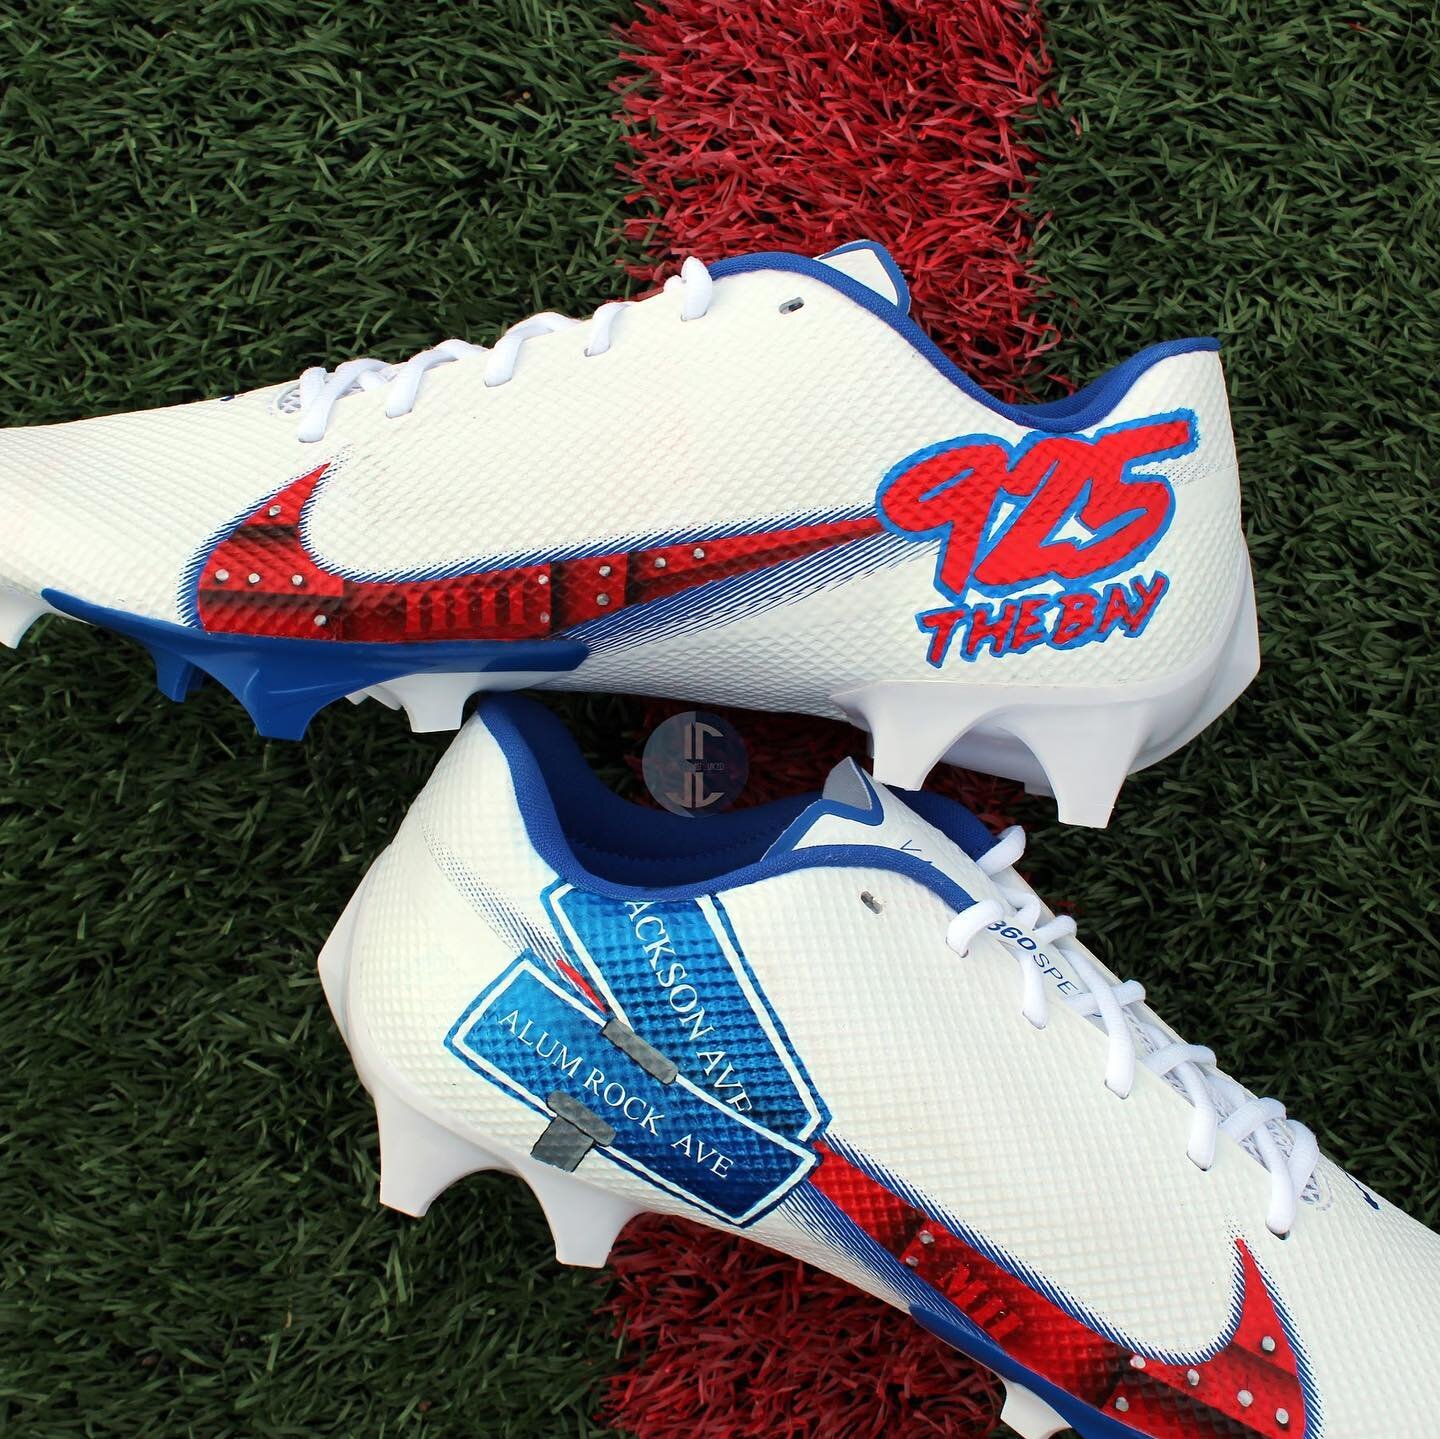 Back this week with two more pairs of custom cleats, and a new player added to my roster. @buffalobills Wide Receiver Isaiah Hodgins @isaiah_hodgins and I teamed up to represent two things close to his heart. His religion, including his favorite vers